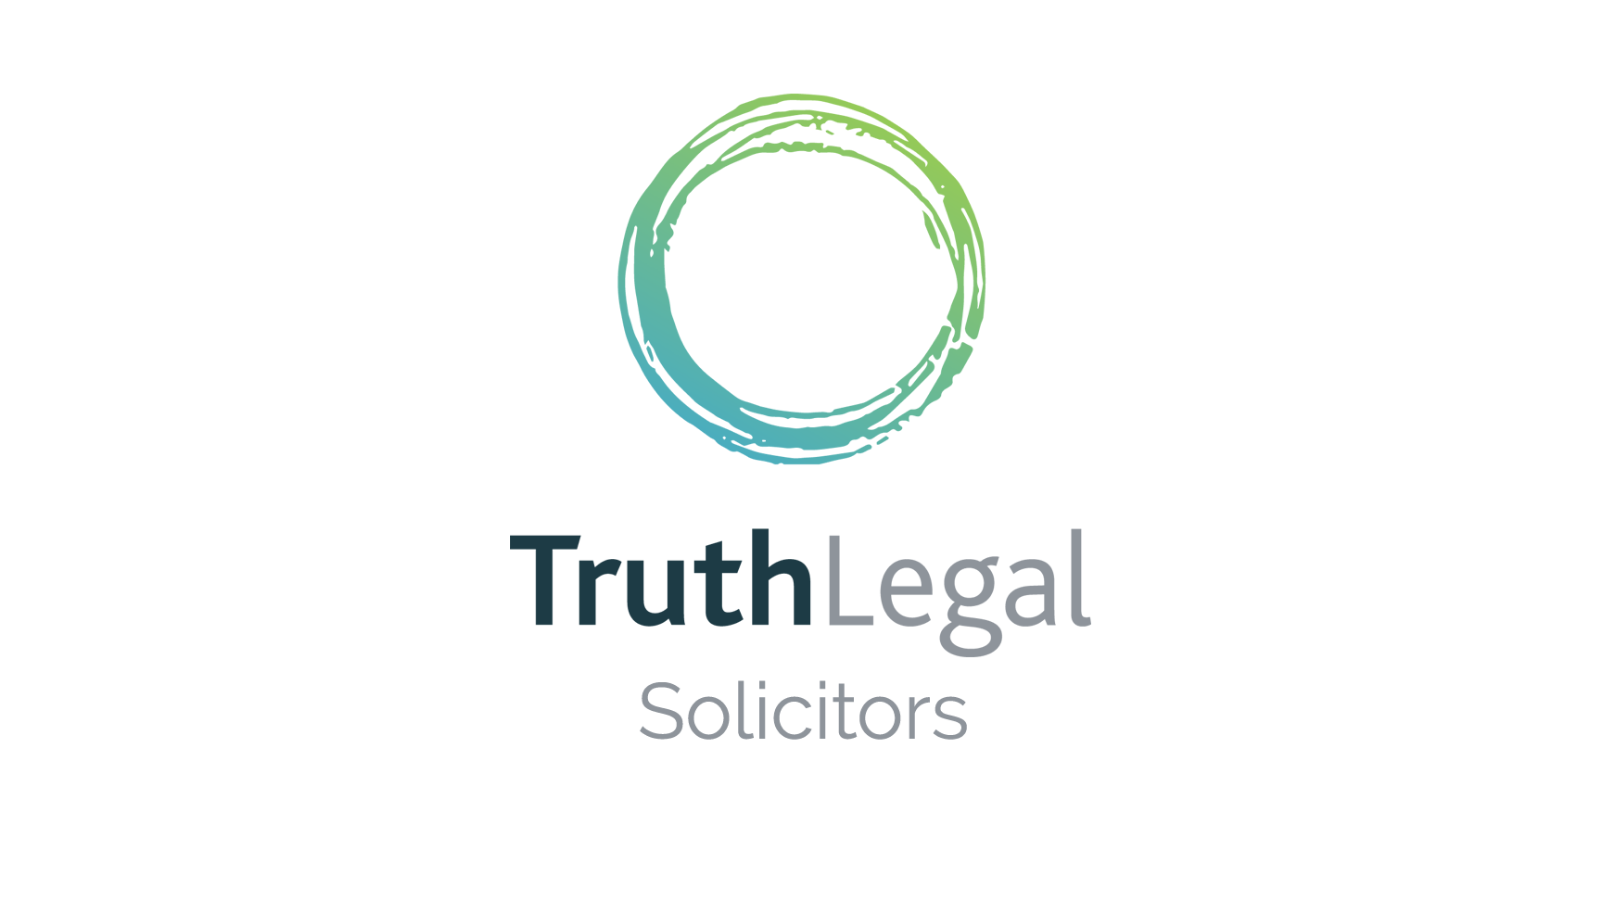 Immigration Specialist Truth Legal joins ATC as Associate Partner